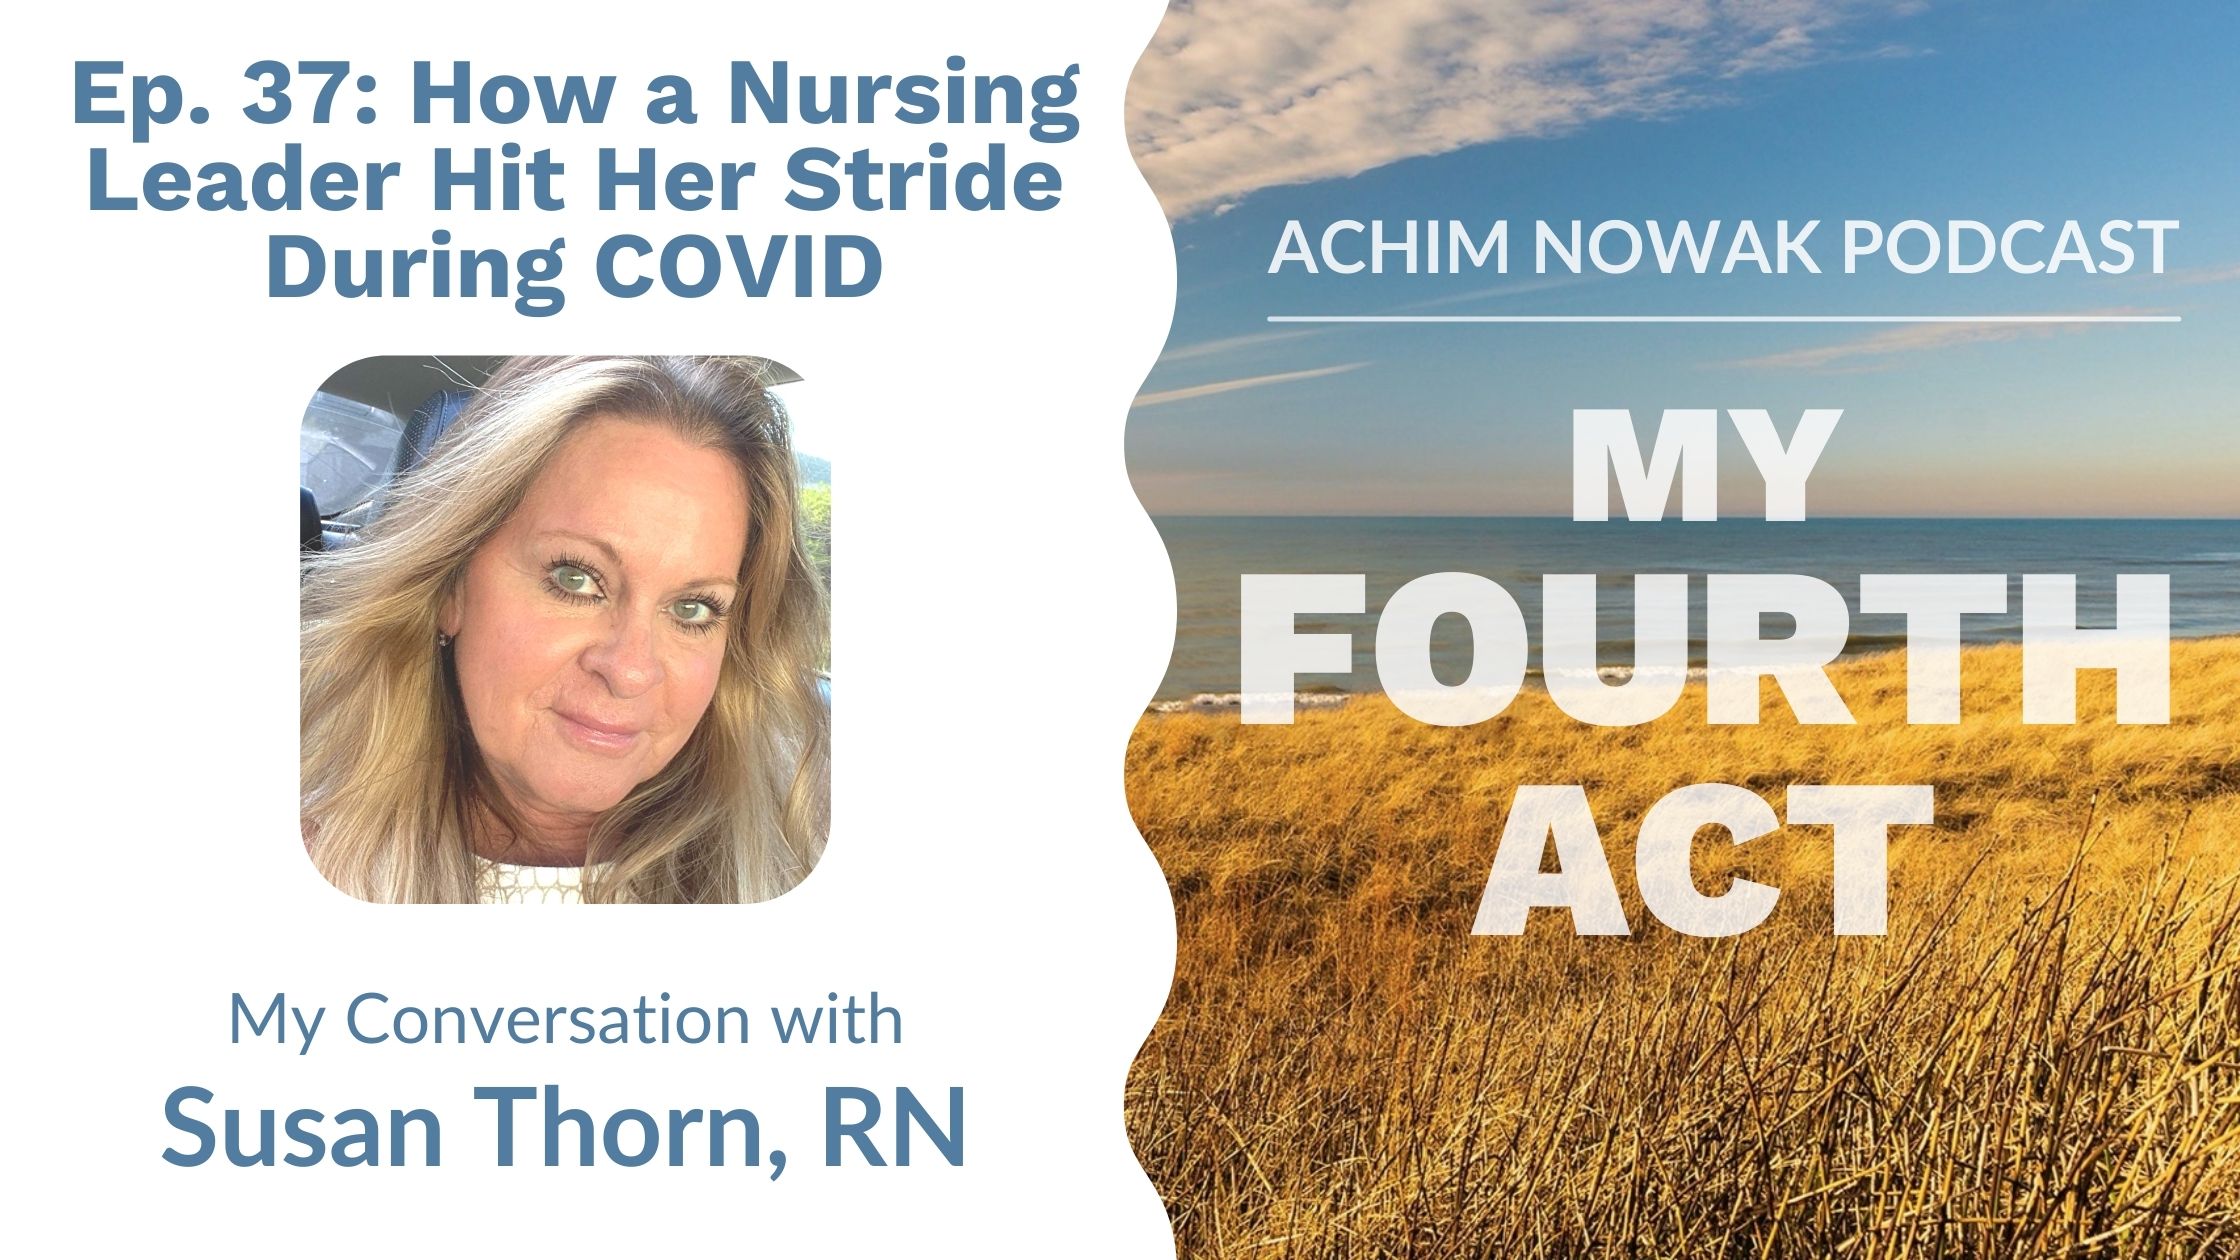 Ep. 37 | Susan Thorn, RN | How a Nursing Leader Hit Her Stride During COVID